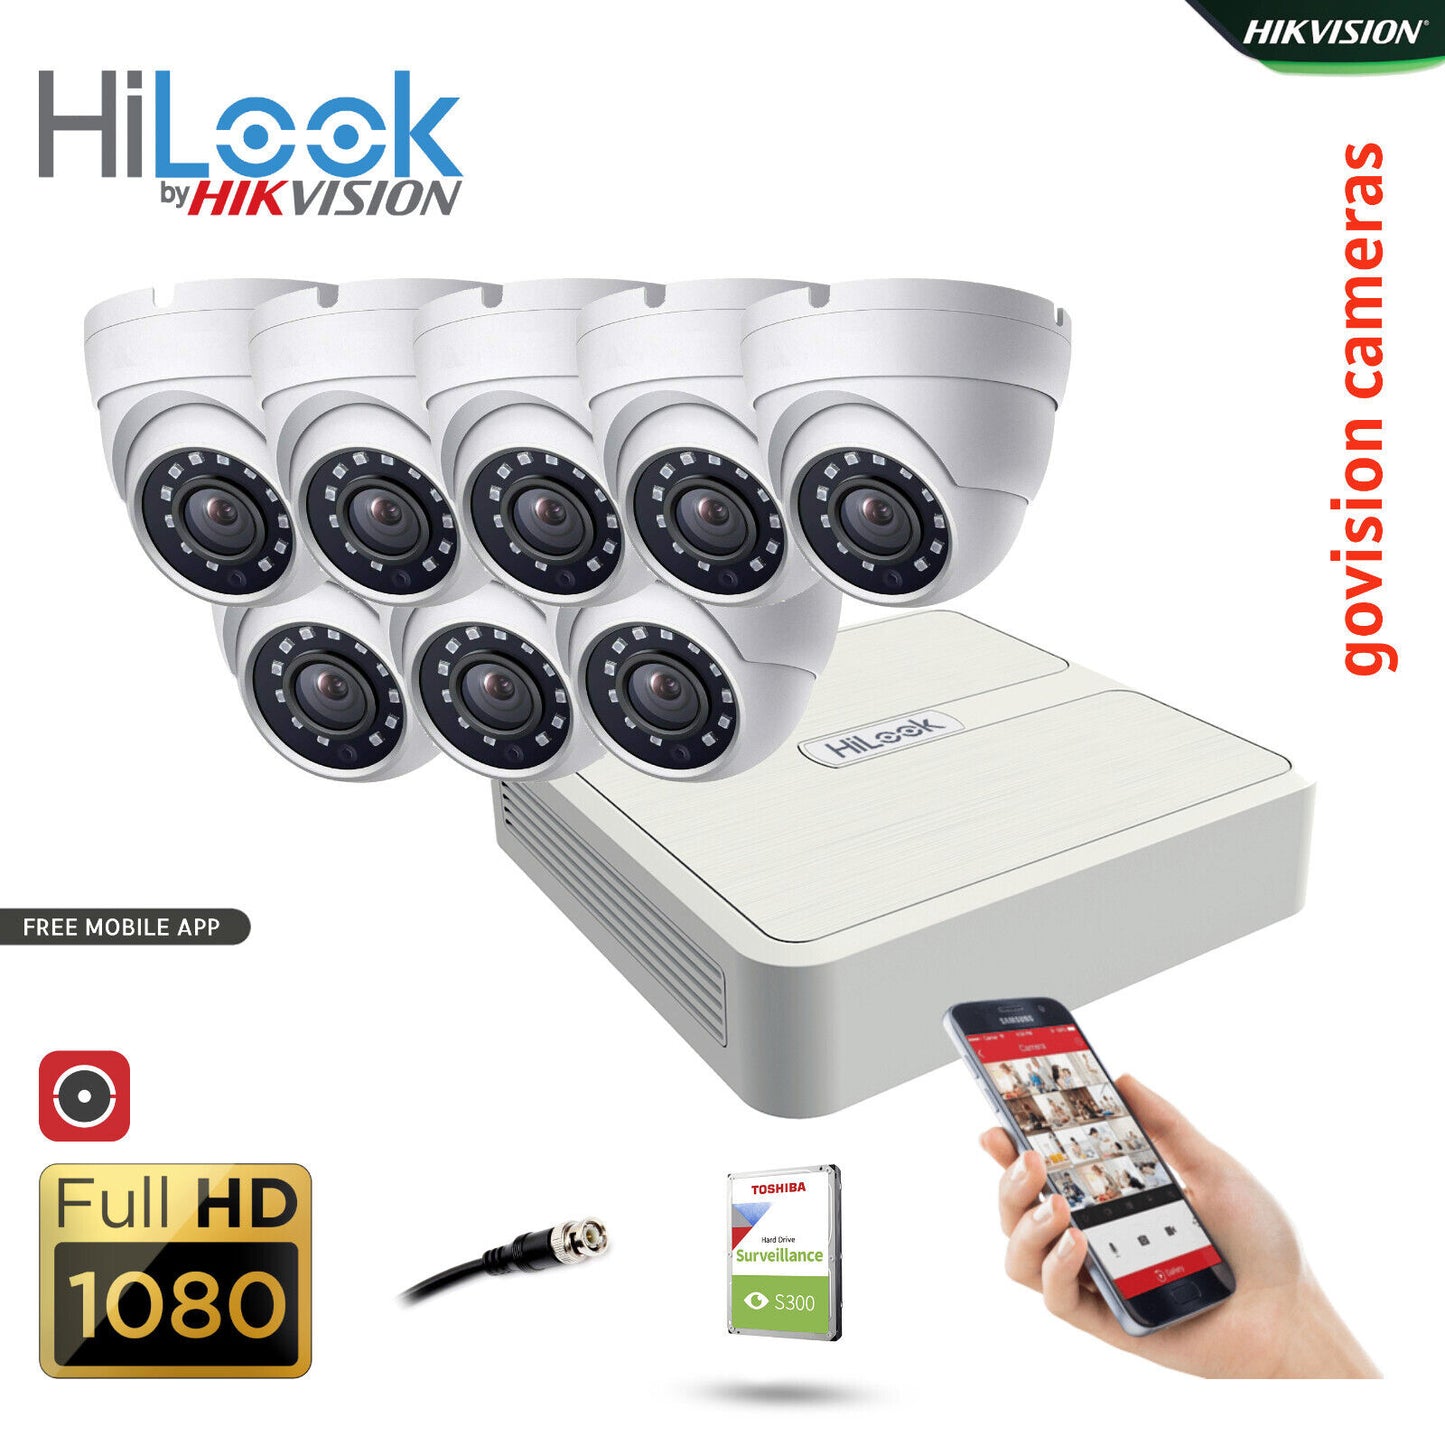 HIKVISION CCTV HD 1080P 2.4MP NIGHT VISION OUTDOOR DVR HOME SECURITY SYSTEM KIT 8CH DVR 8x Cameras (white) 2TB HDD